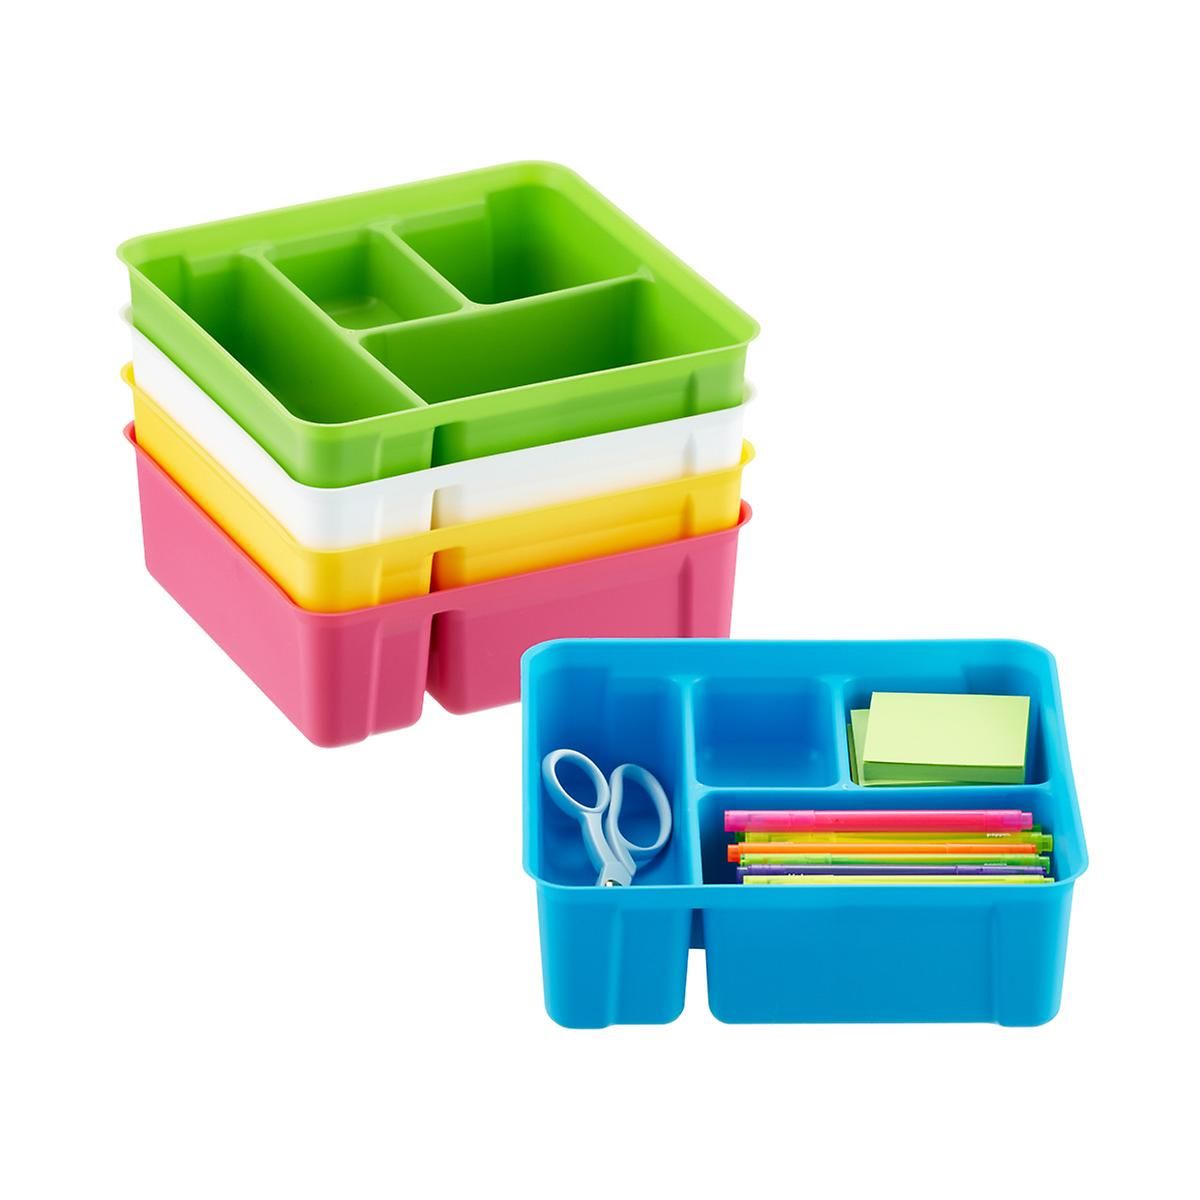 SmartStore 4-Compartment Tray | The Container Store